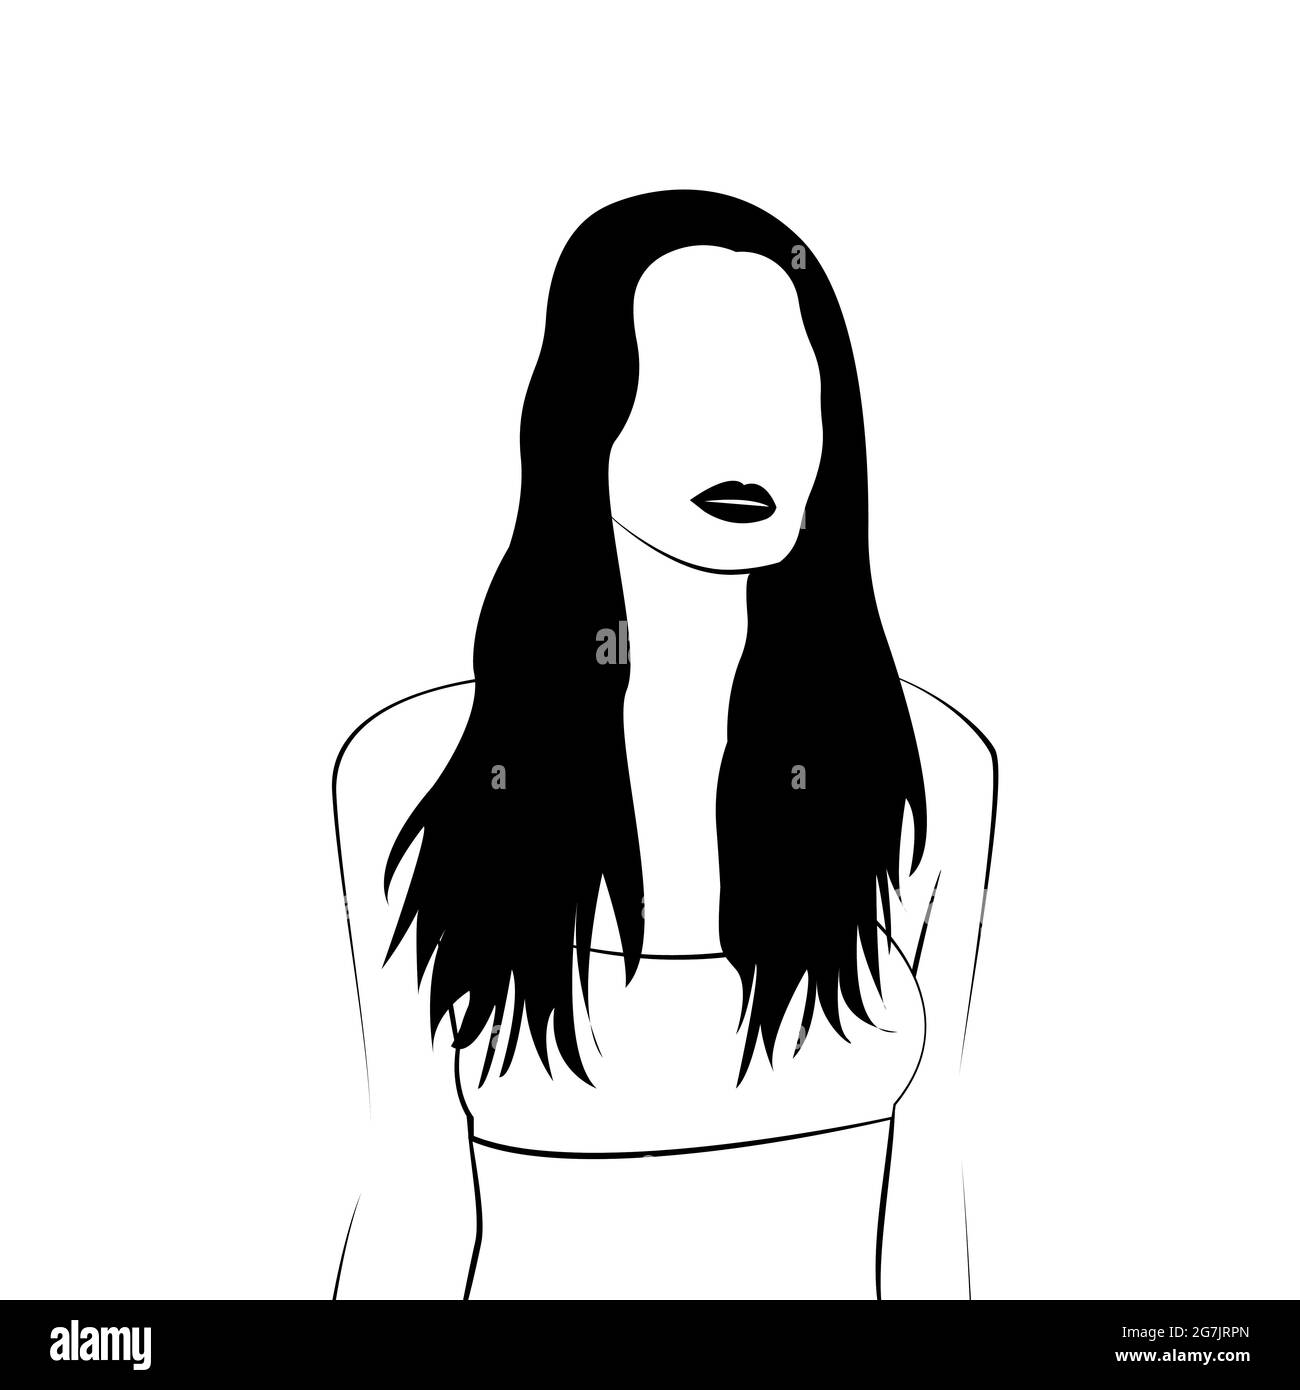 Abstract minimal portrait of girls. Woman portraits. Beauty logo. Concept of females. Feminine power, an abstract figure without no face. Vector Stock Vector